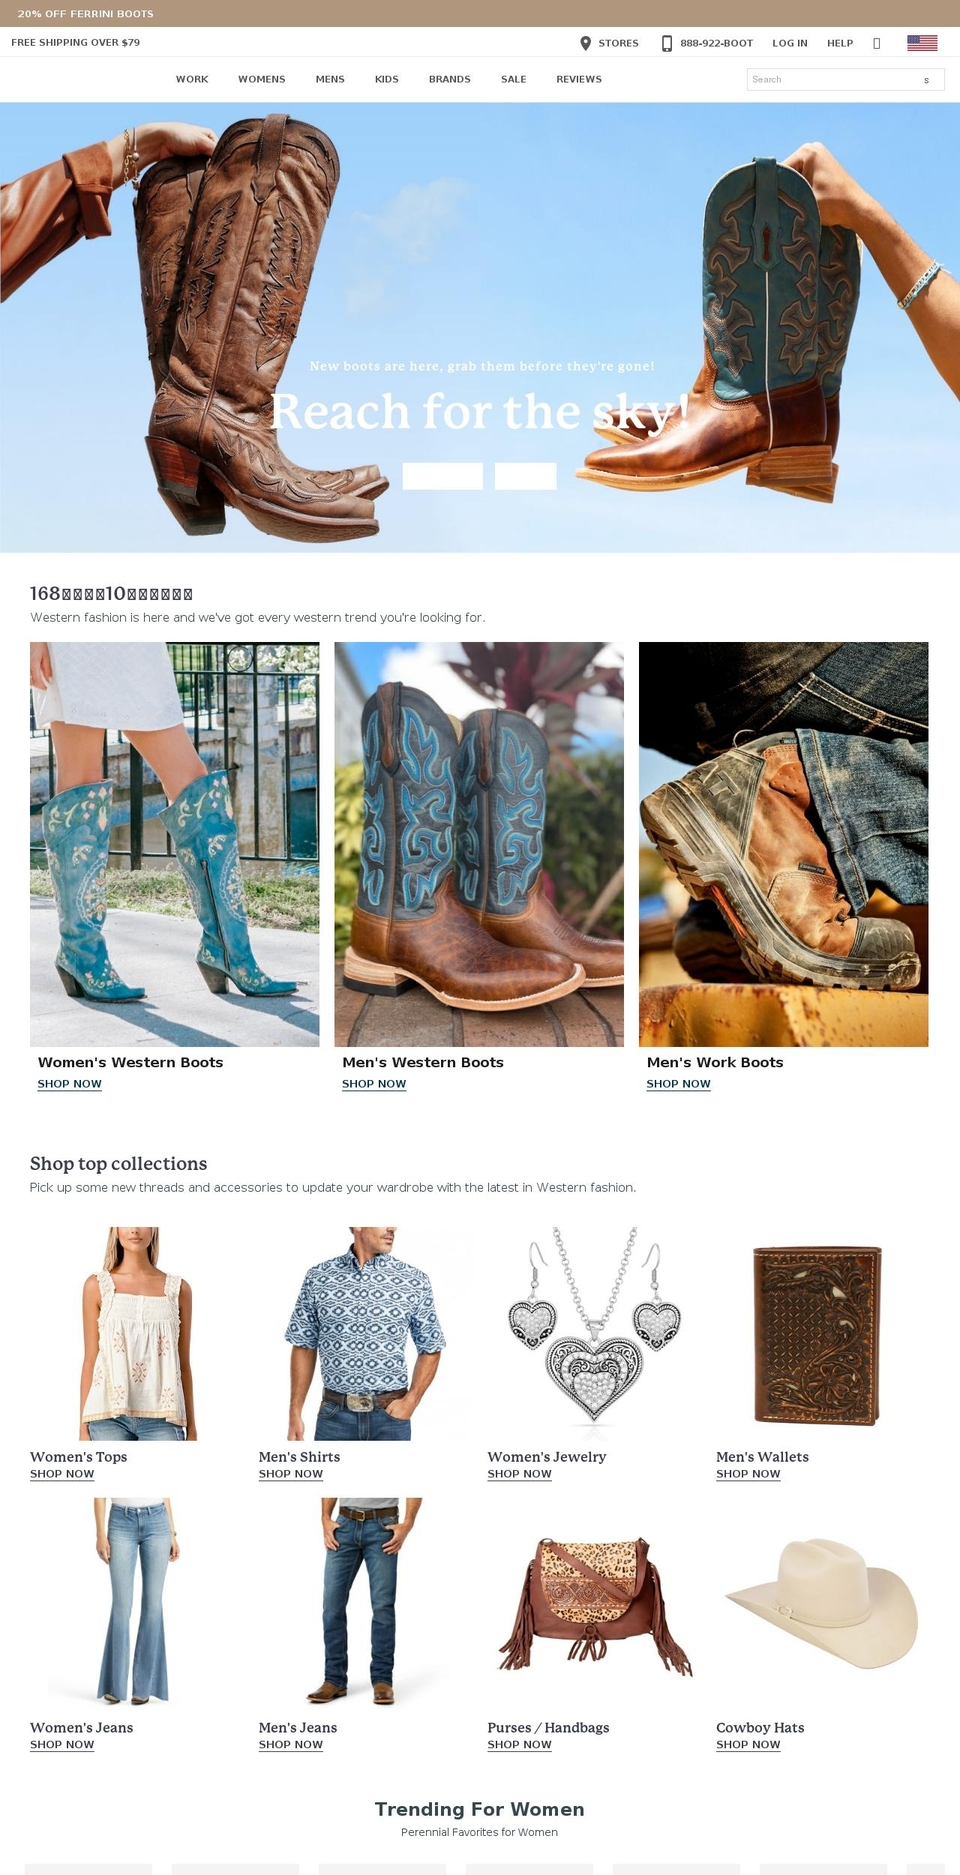 Timber Shopify theme site example wwwhljnce.com